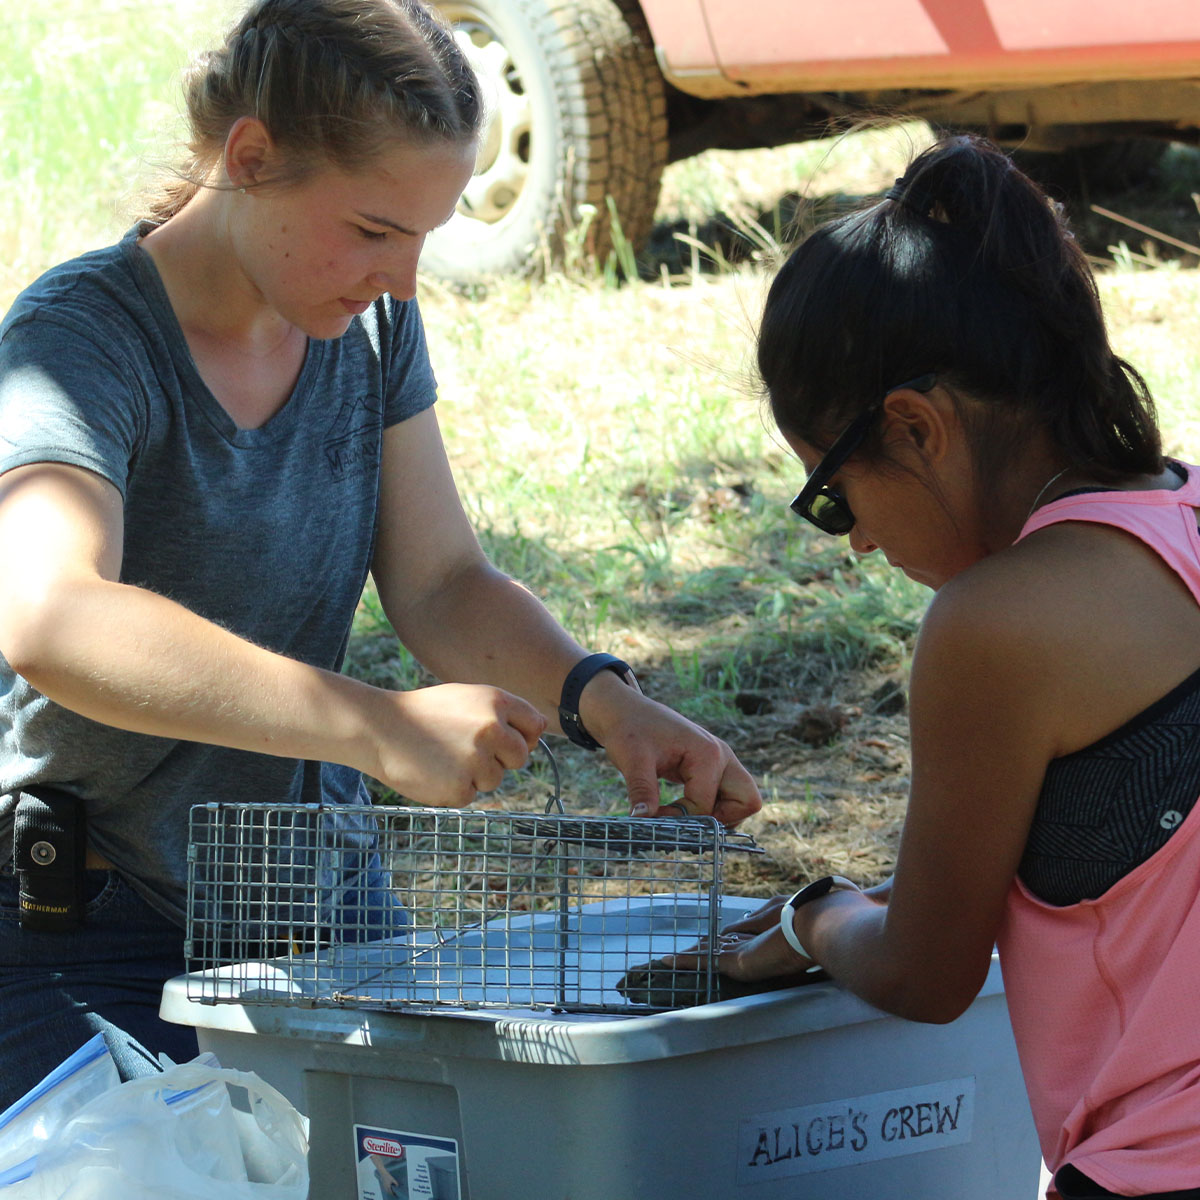 Two researchers gently hold a ground squirrel in the forest.